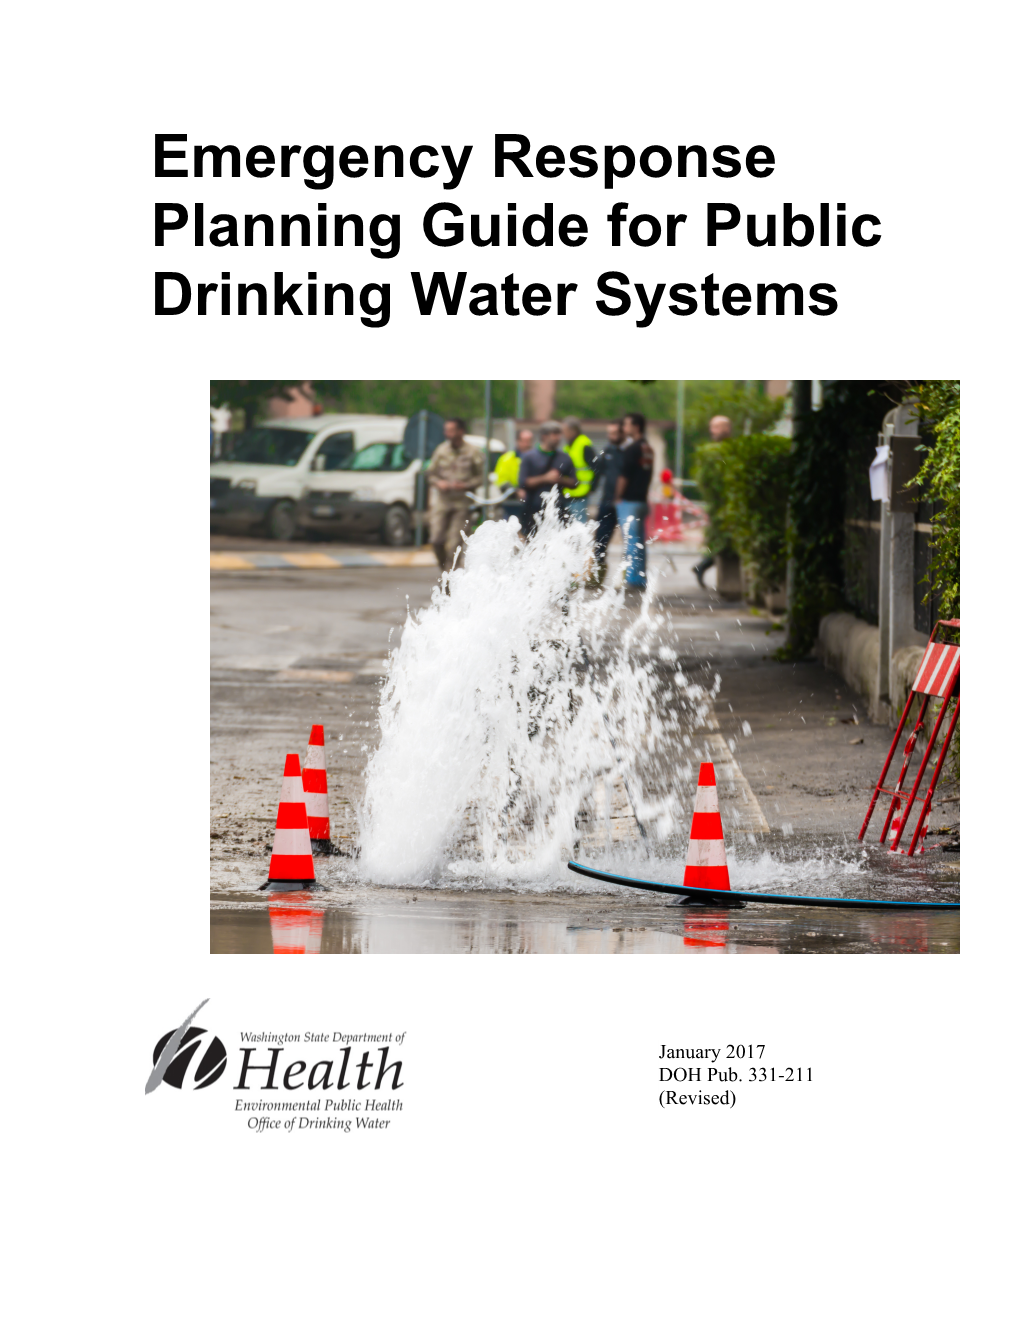 Emergency Response Planning Guide For Public Drinking Water Systems